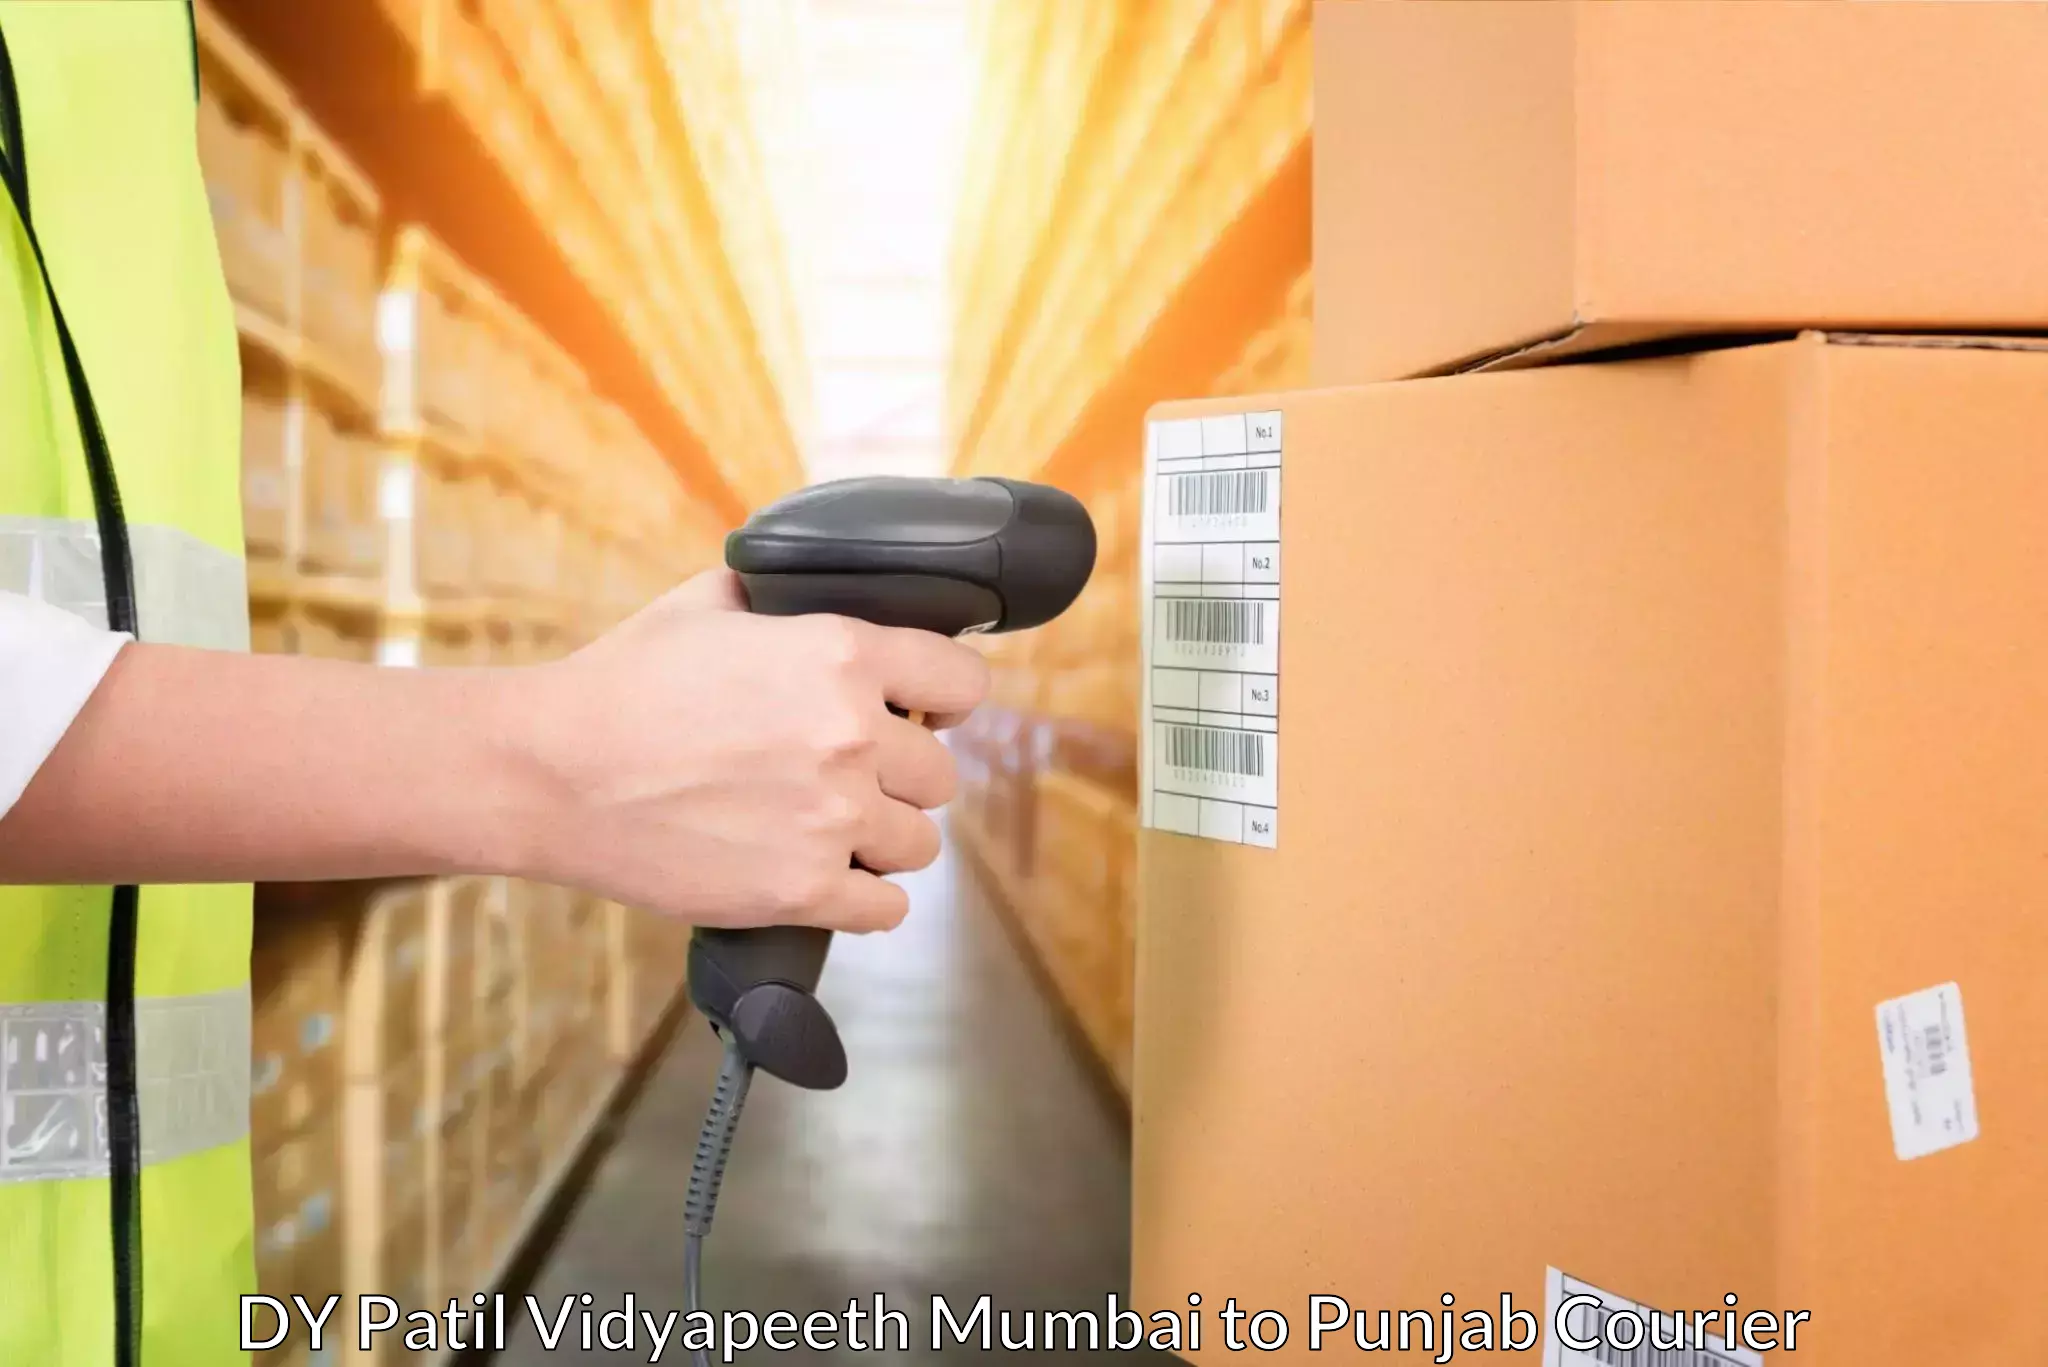 Sustainable delivery practices DY Patil Vidyapeeth Mumbai to Patiala